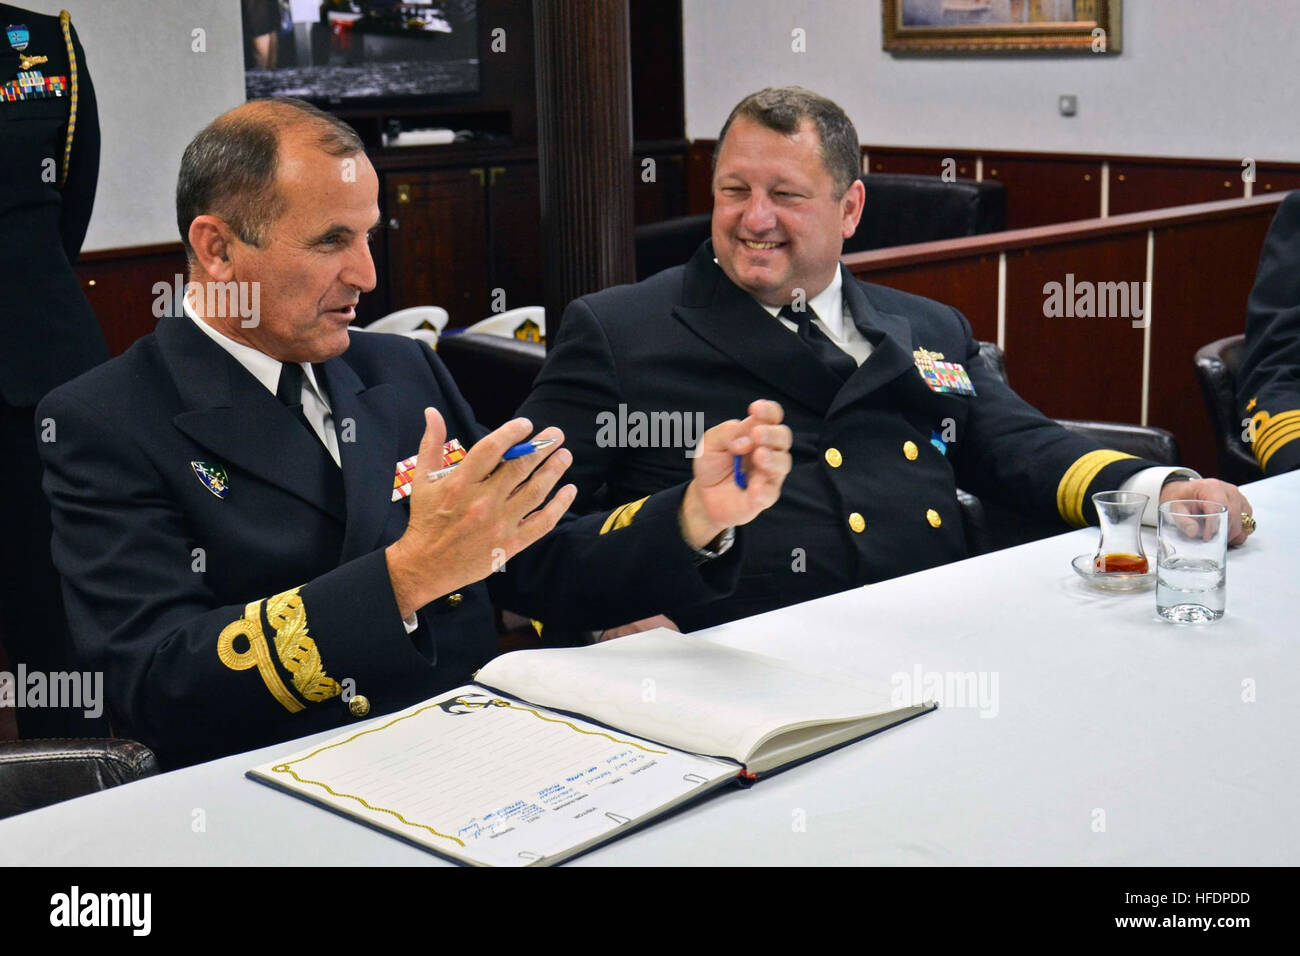 150605-N-IY633-120 GDYNIA, Poland (June 5, 2015) – Deputy Chief of Staff, Operations, Naval Striking and Support Forces NATO, Rear Adm. Juan Garat, left; speaks with Commander, Standing NATO Maritime Group 2 (SNMG2), Rear Adm. Brad Williamson; aboard SNMG2 Turkish ship TCG Göksu (F 497) during SNMG2’s port visit to the city in preparation for exercise Baltic Operations (BALTOPS). BALTOPS is an annually reoccurring multinational exercise designed to enhance flexibility and interoperability, as well as demonstrate resolve of Allied and partner forces to defend the Baltic region. (U.S. Navy photo Stock Photo